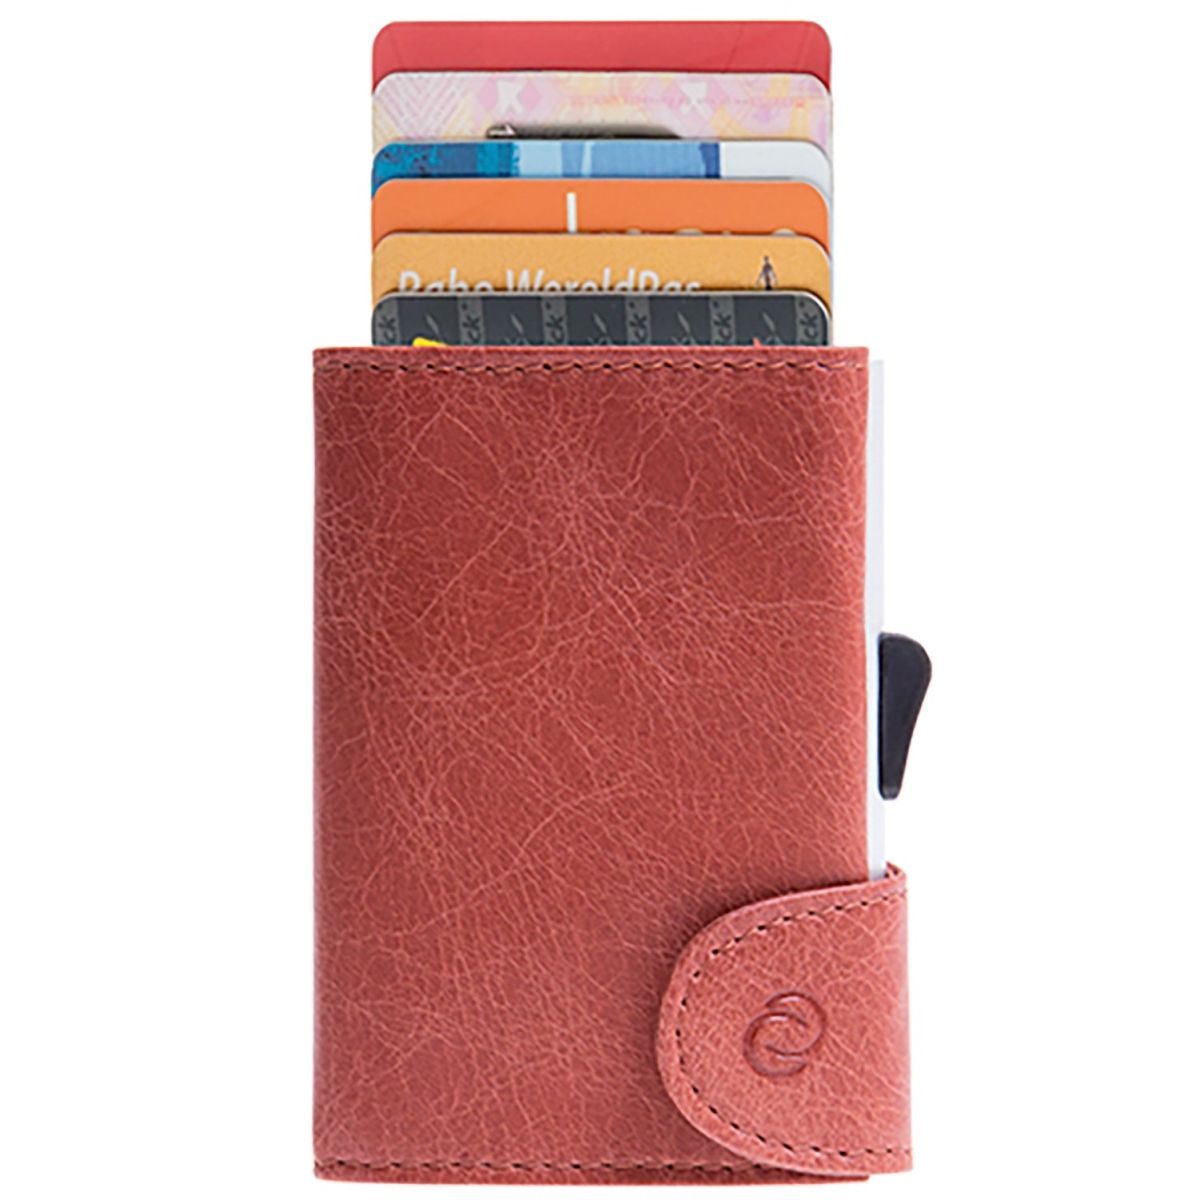 Wallets From $31 To $50 , Wallets Prices , Best Price Wallets 